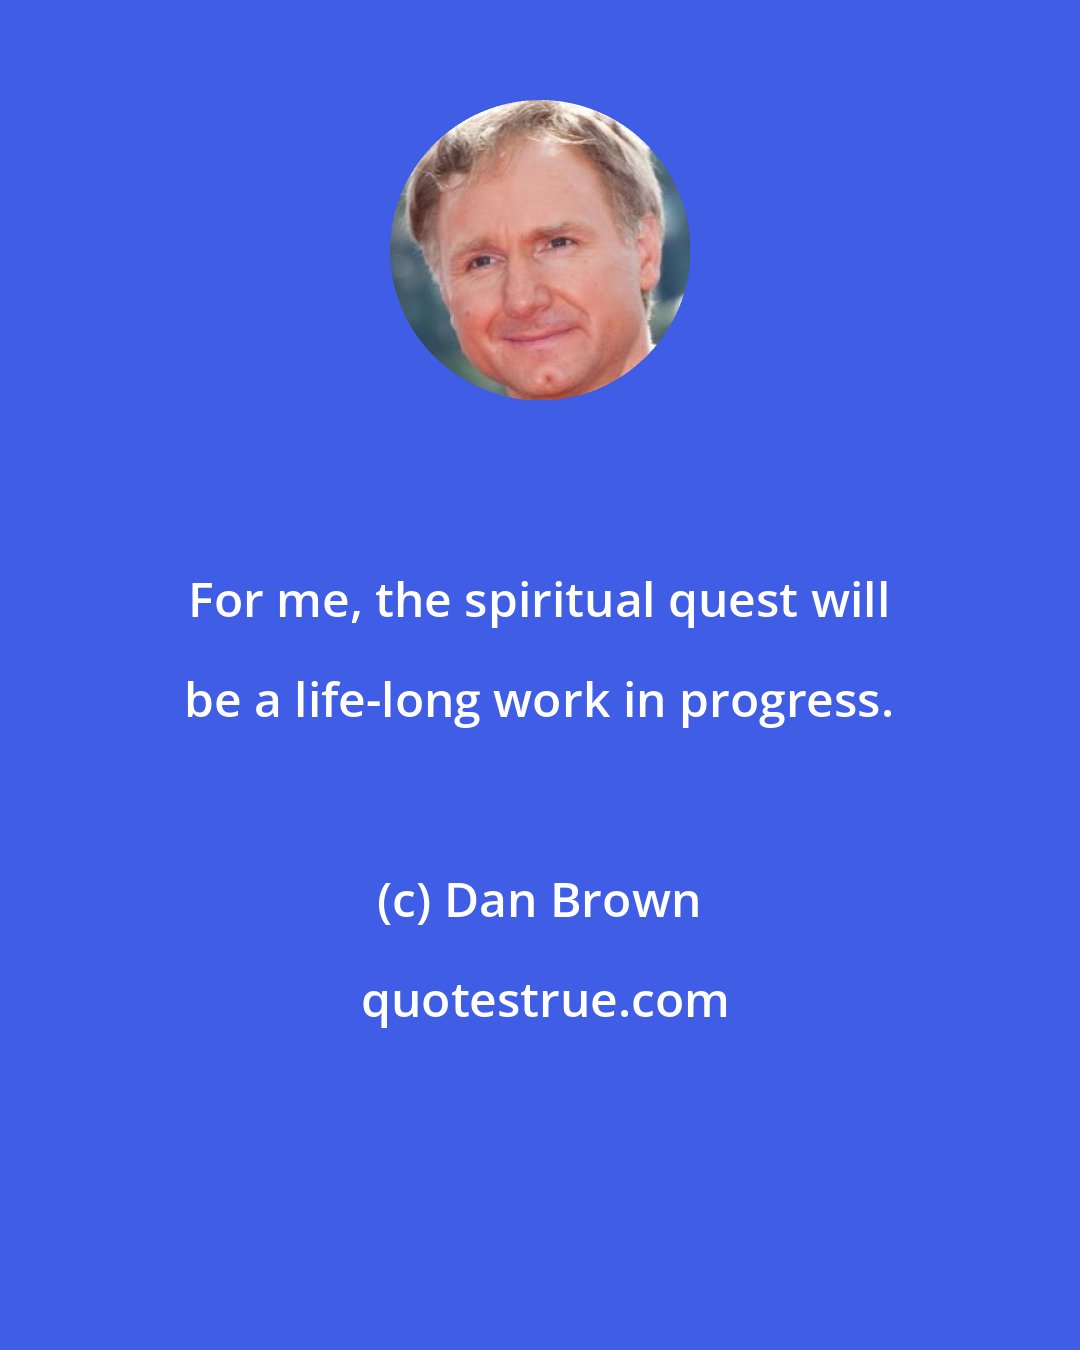 Dan Brown: For me, the spiritual quest will be a life-long work in progress.